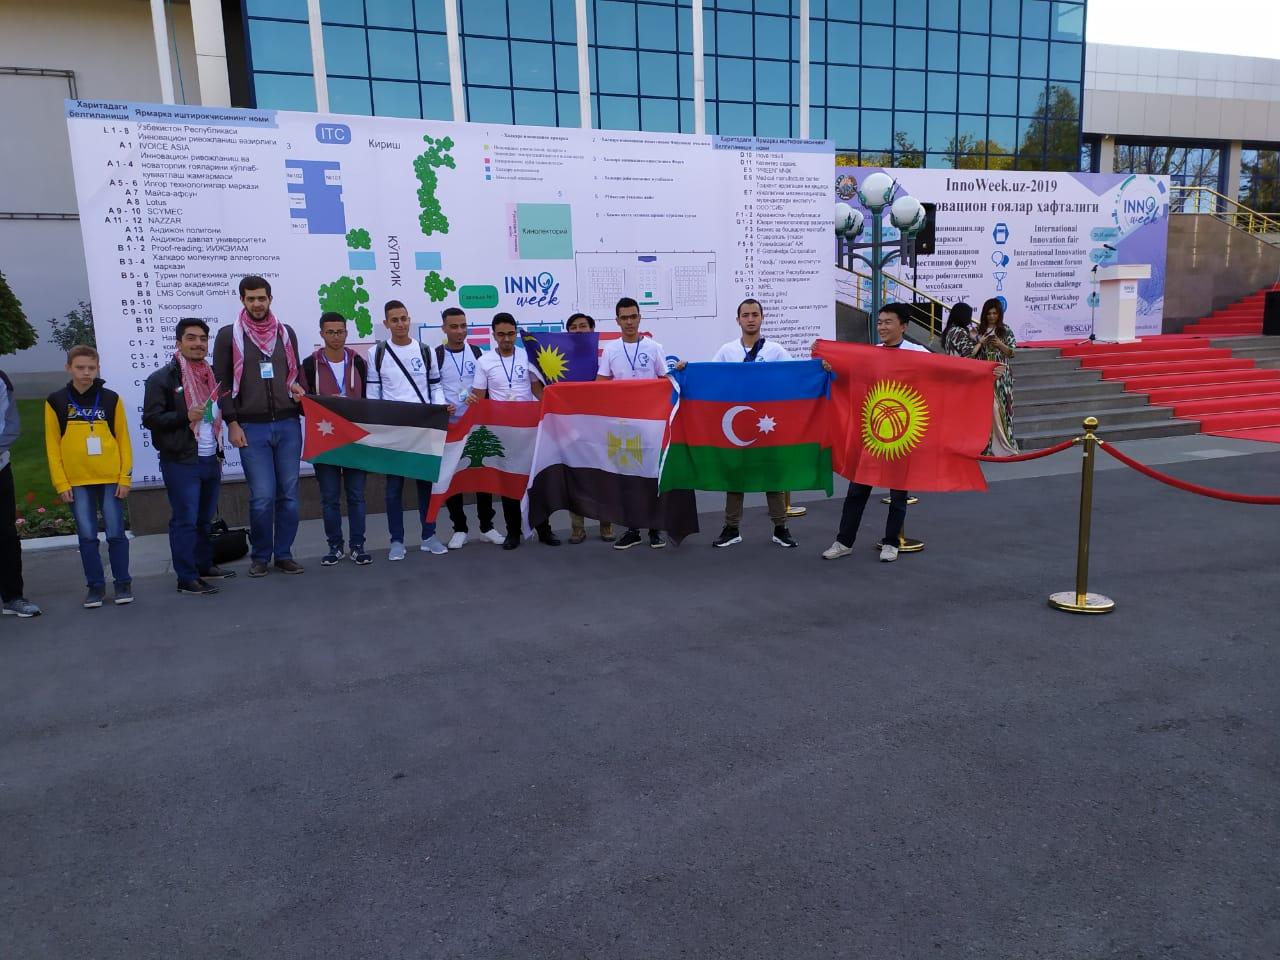 Azerbaijan in Top 10 of First OIC Robotics Challenge